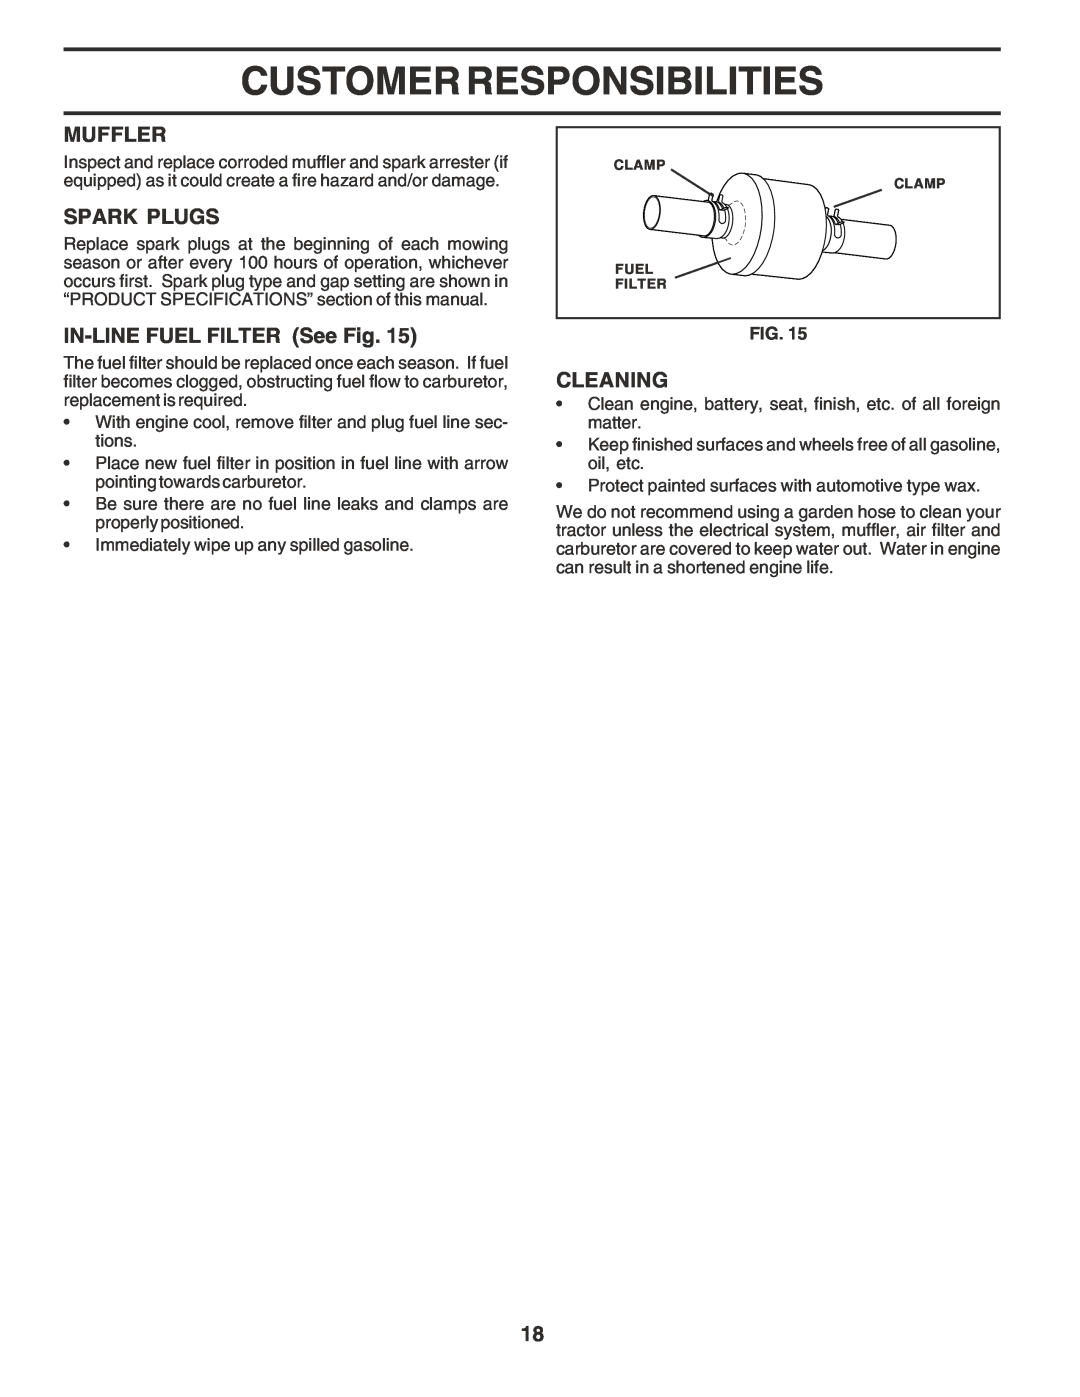 Poulan PO14542E manual Muffler, Spark Plugs, IN-LINEFUEL FILTER See Fig, Cleaning, Customer Responsibilities 